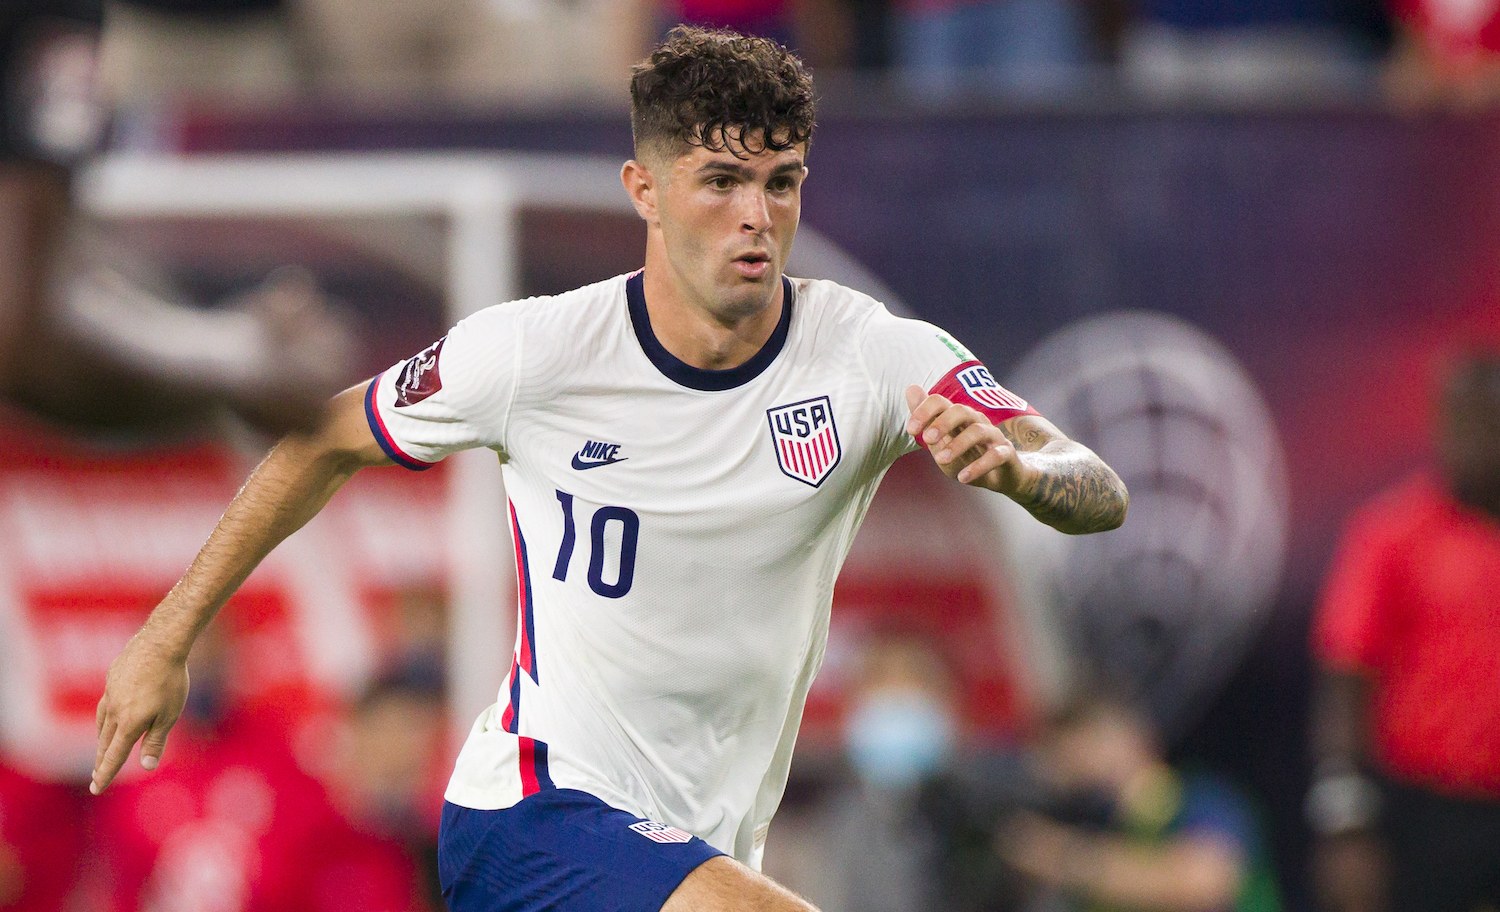 NASHVILLE, TN - SEPTEMBER 05: Christian Pulisic #10 of United States runs with the ball on net against Canada during the first half of their World Cup qualifying match at Nissan Stadium on September 5, 2021 in Nashville, Tennessee. (Photo by Brett Carlsen/Getty Images) *** Local Caption *** Christian Pulisic